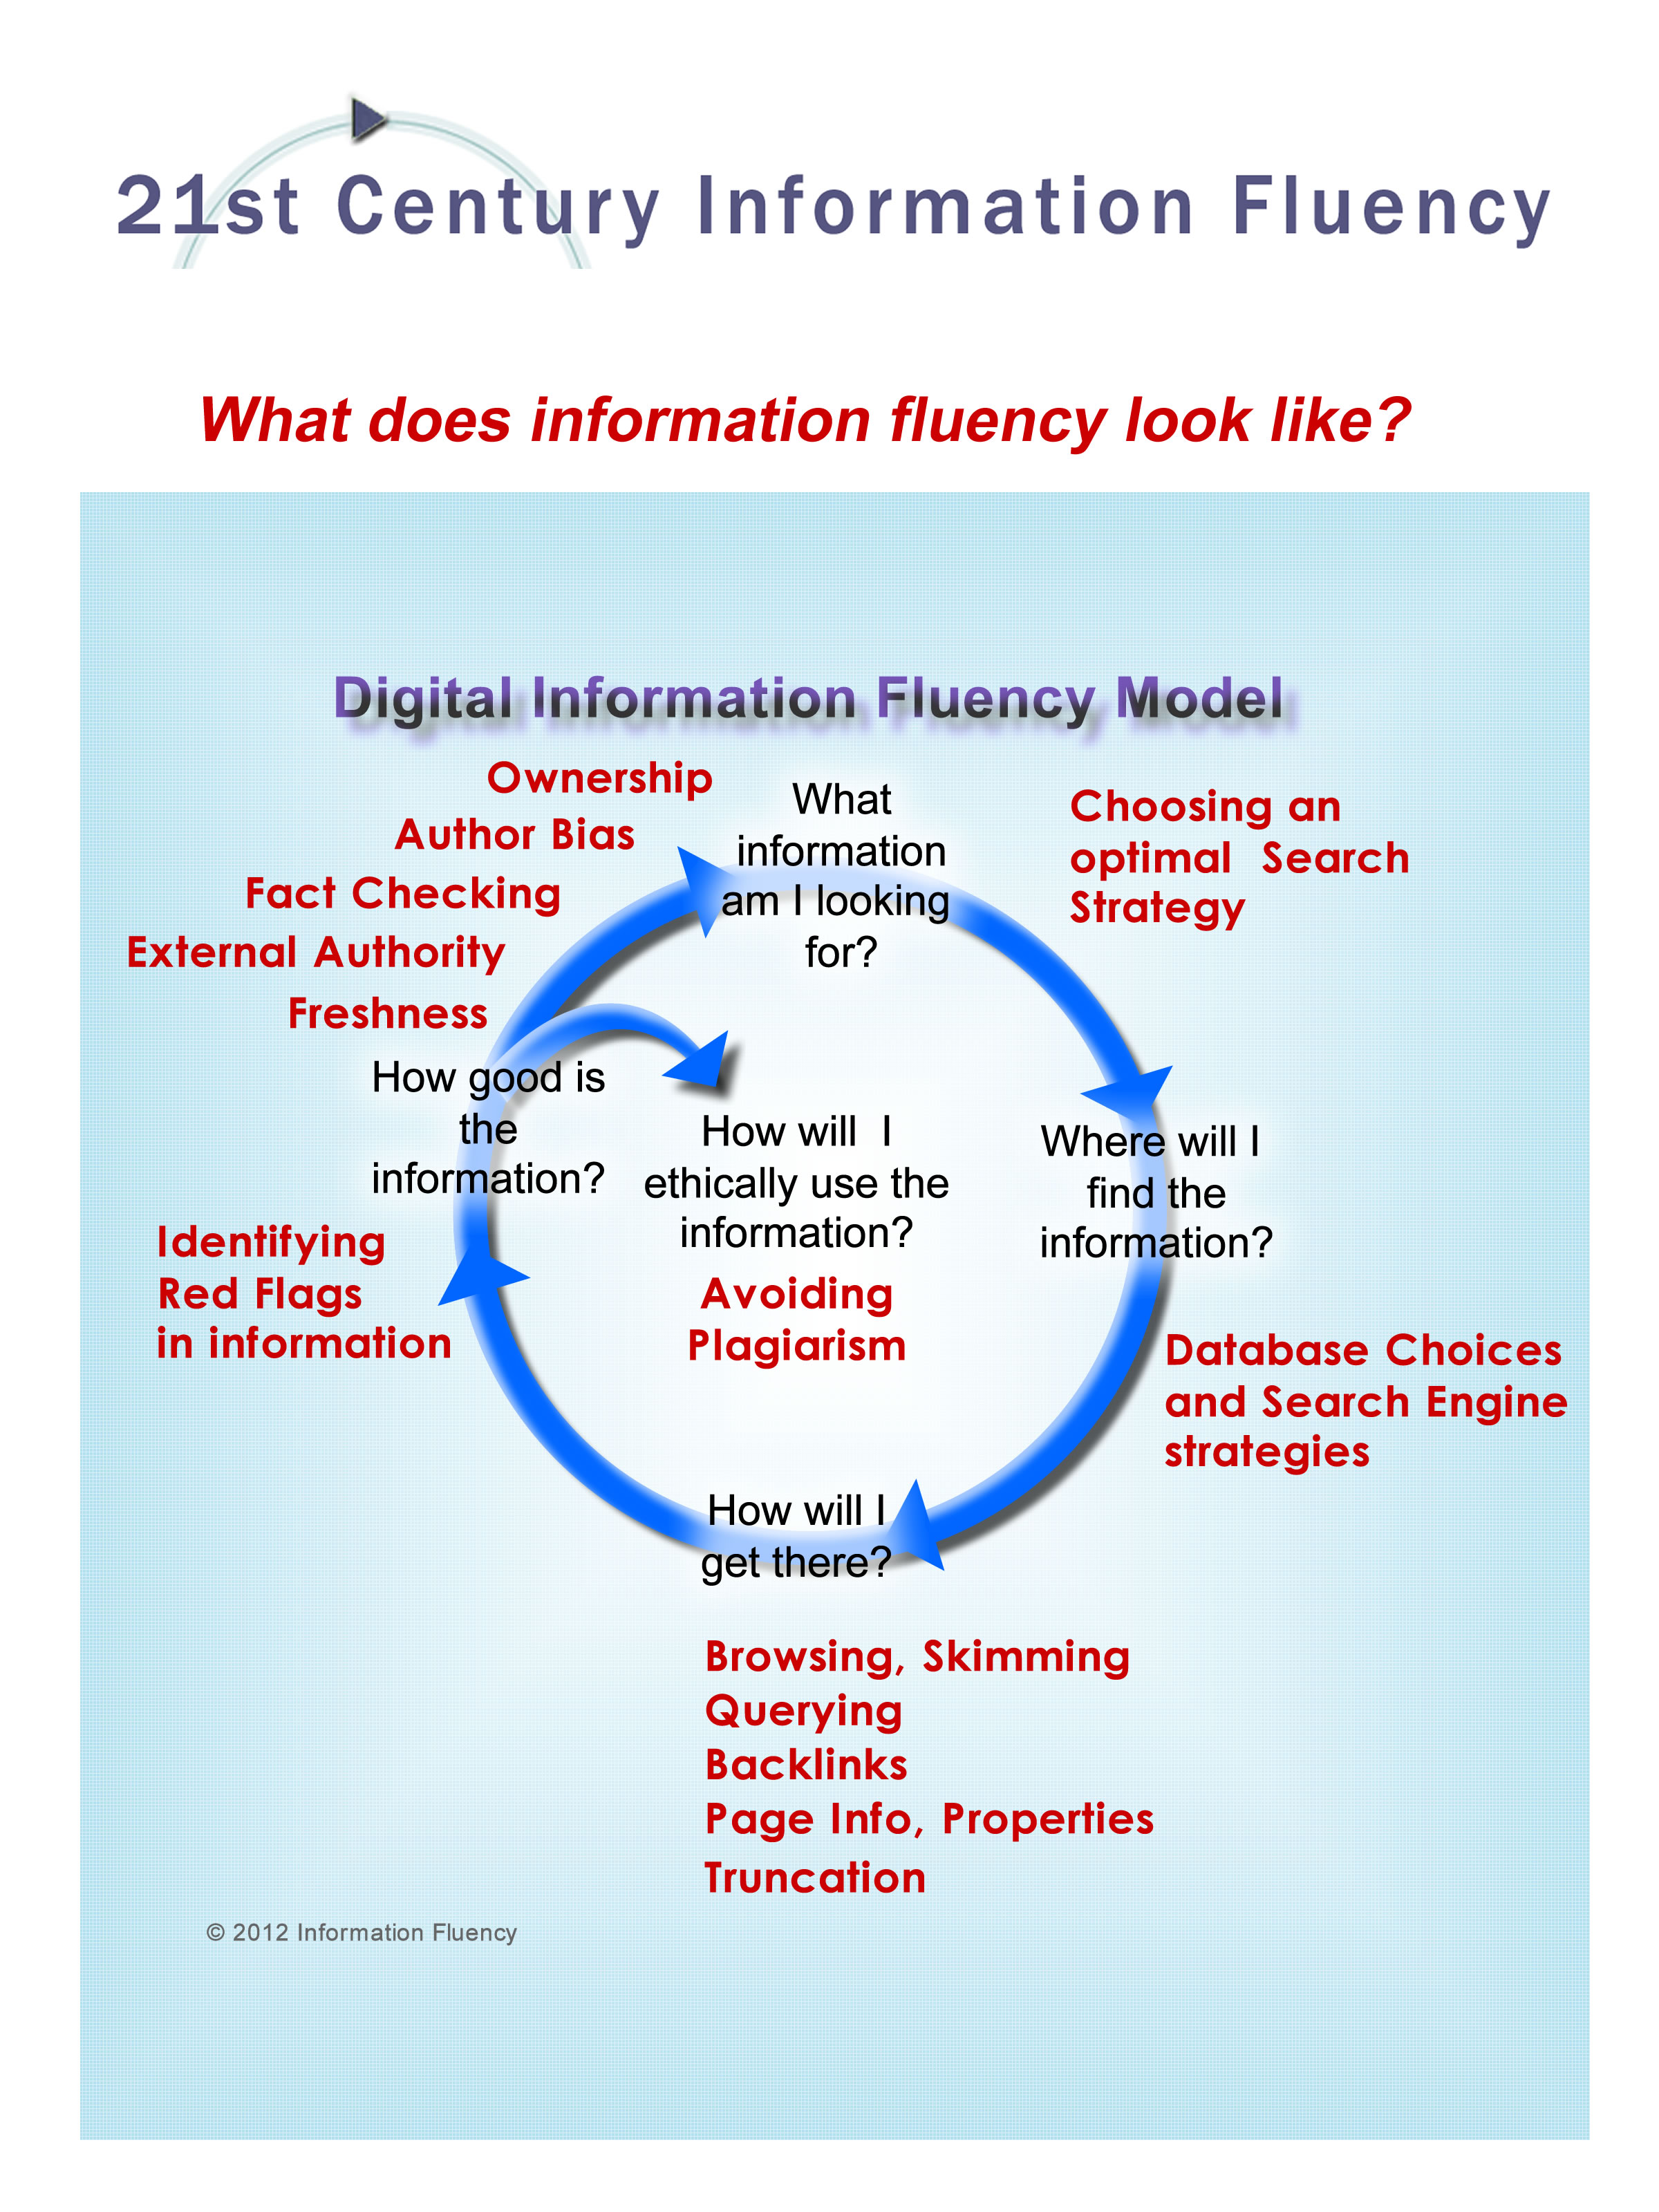 Critical thinking foundational for digital literacies and democracy